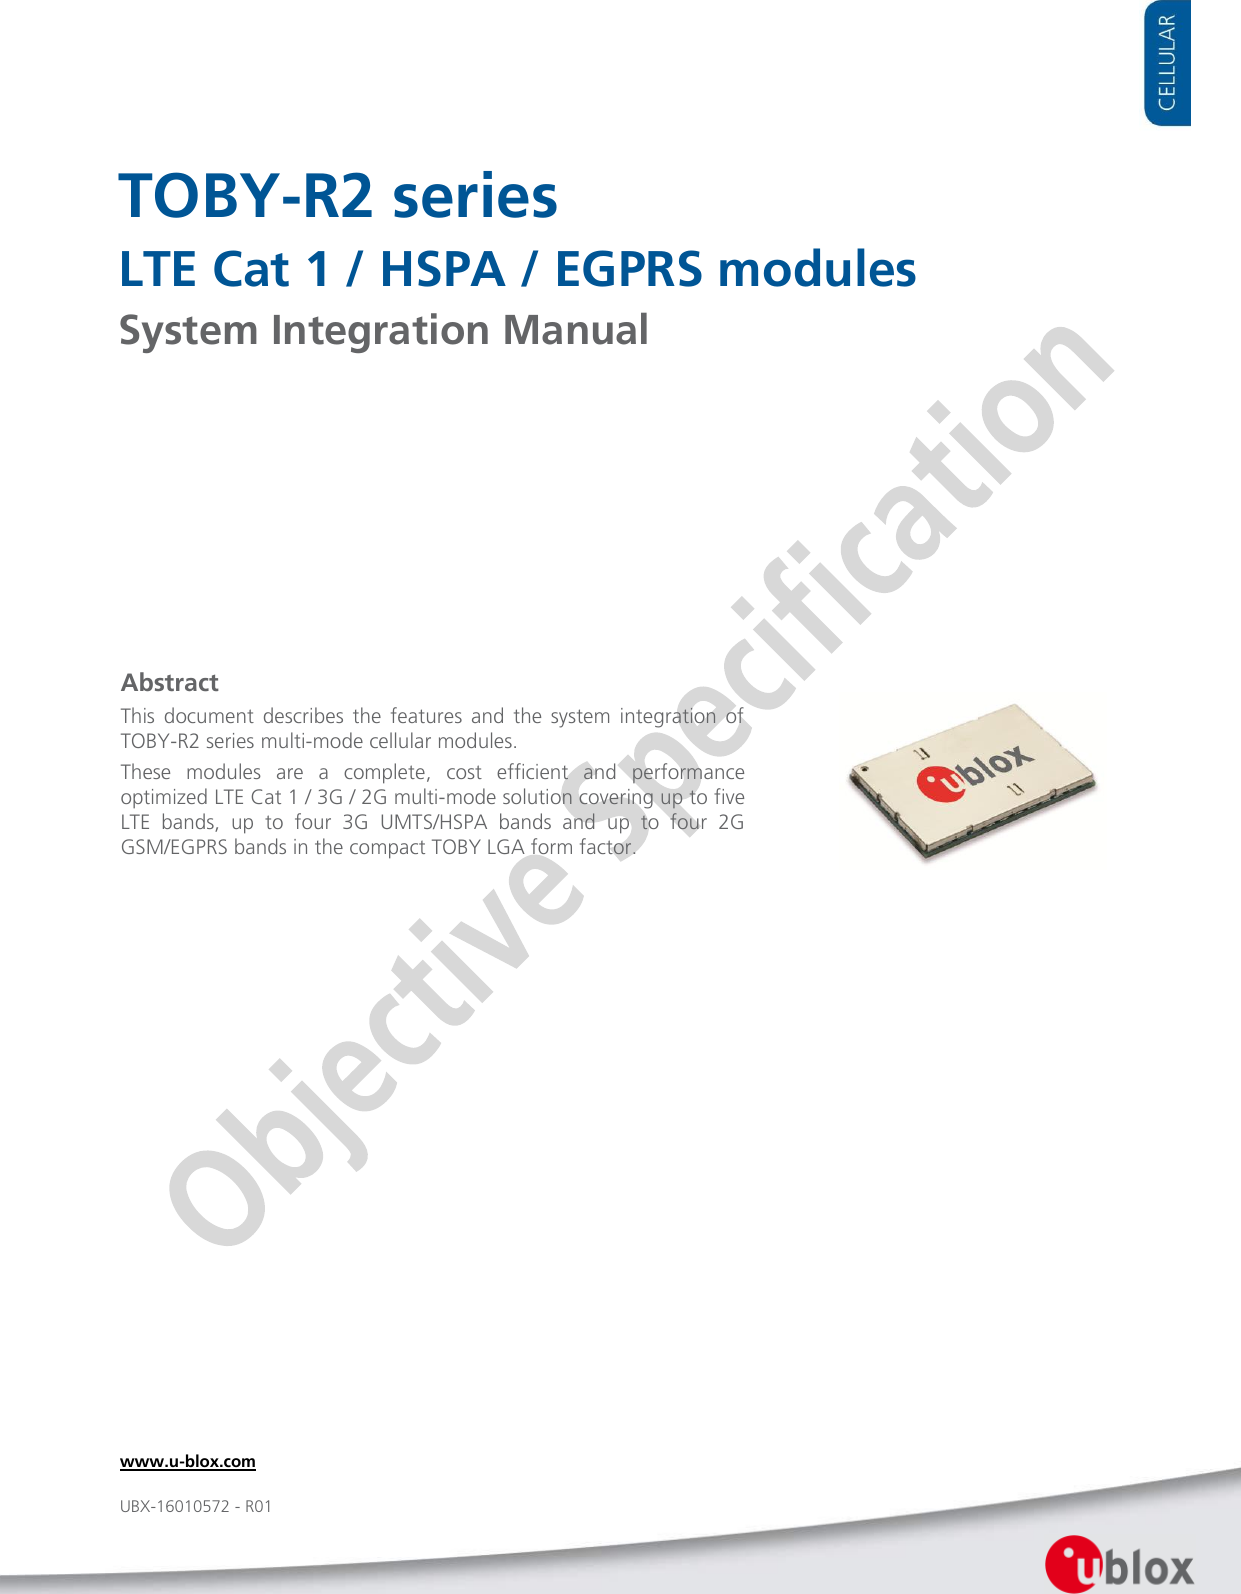     TOBY-R2 series LTE Cat 1 / HSPA / EGPRS modules System Integration Manual               Abstract This  document  describes  the  features  and  the  system  integration  of TOBY-R2 series multi-mode cellular modules. These  modules  are  a  complete,  cost  efficient  and  performance optimized LTE Cat 1 / 3G / 2G multi-mode solution covering up to five LTE  bands,  up  to  four  3G  UMTS/HSPA  bands  and  up  to  four  2G GSM/EGPRS bands in the compact TOBY LGA form factor. www.u-blox.com UBX-16010572 - R01 